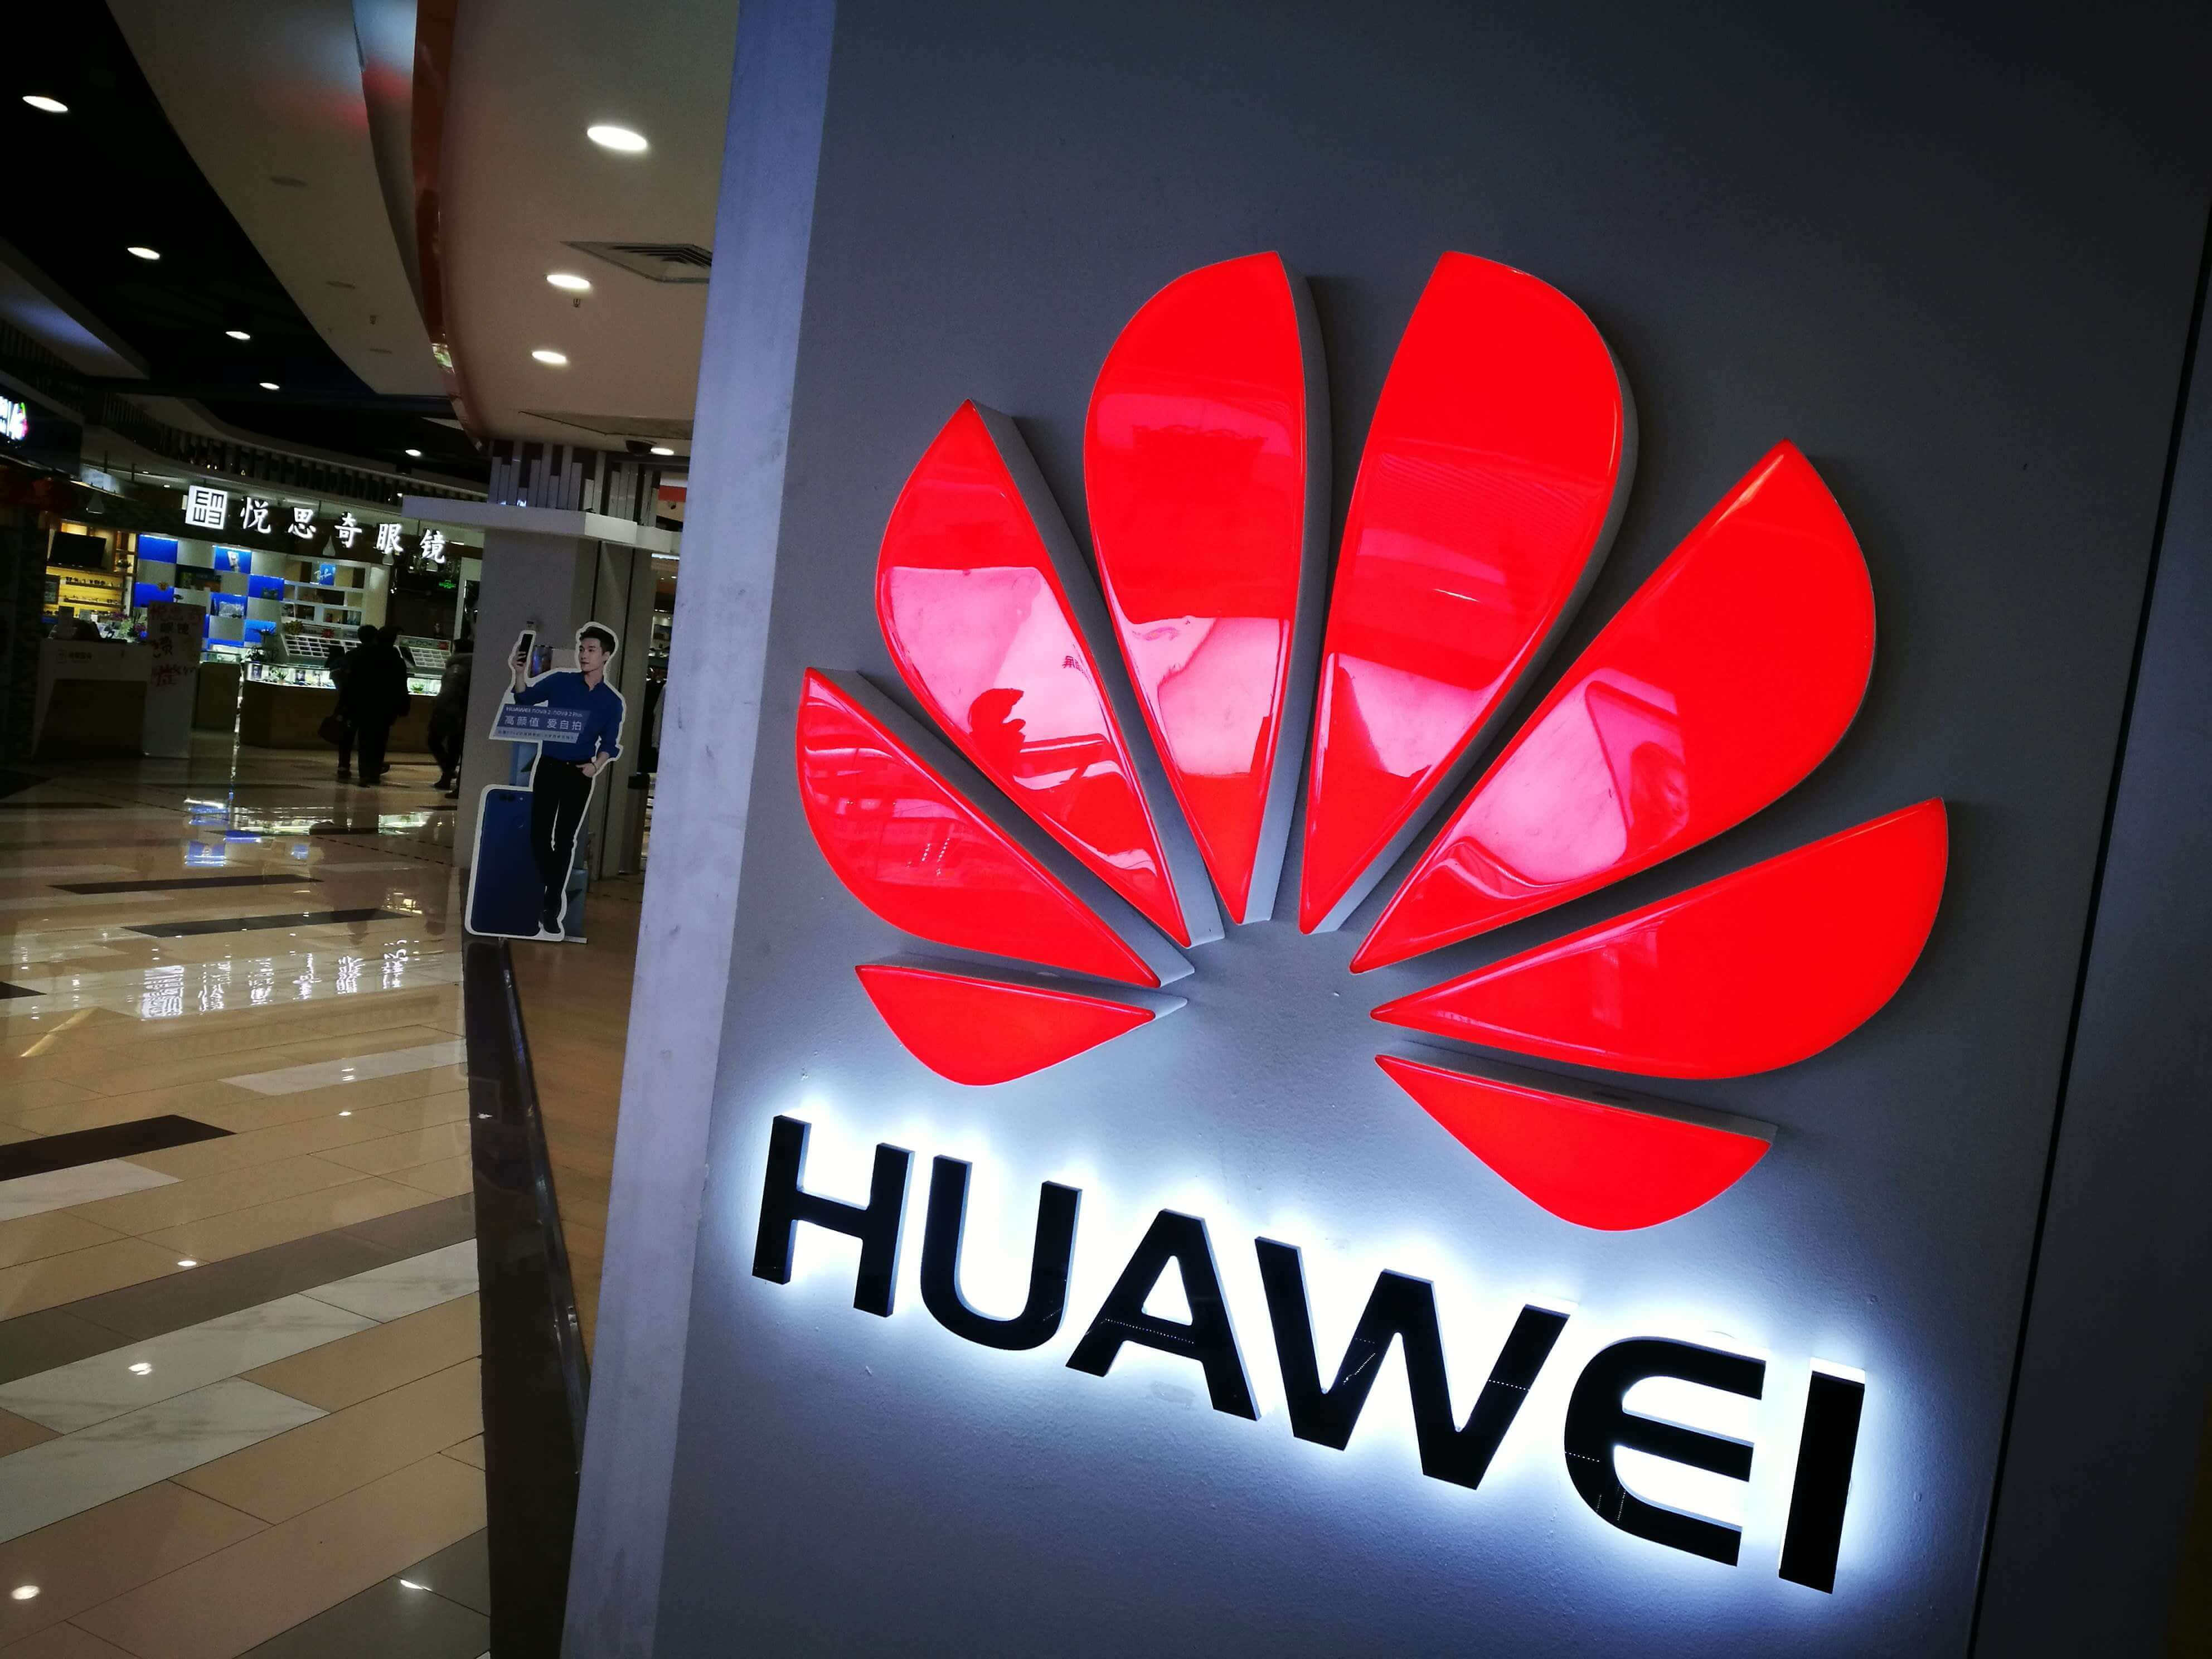 Huawei reaches record $122 billion revenue despite US government sanctions, warns of tough times ahead